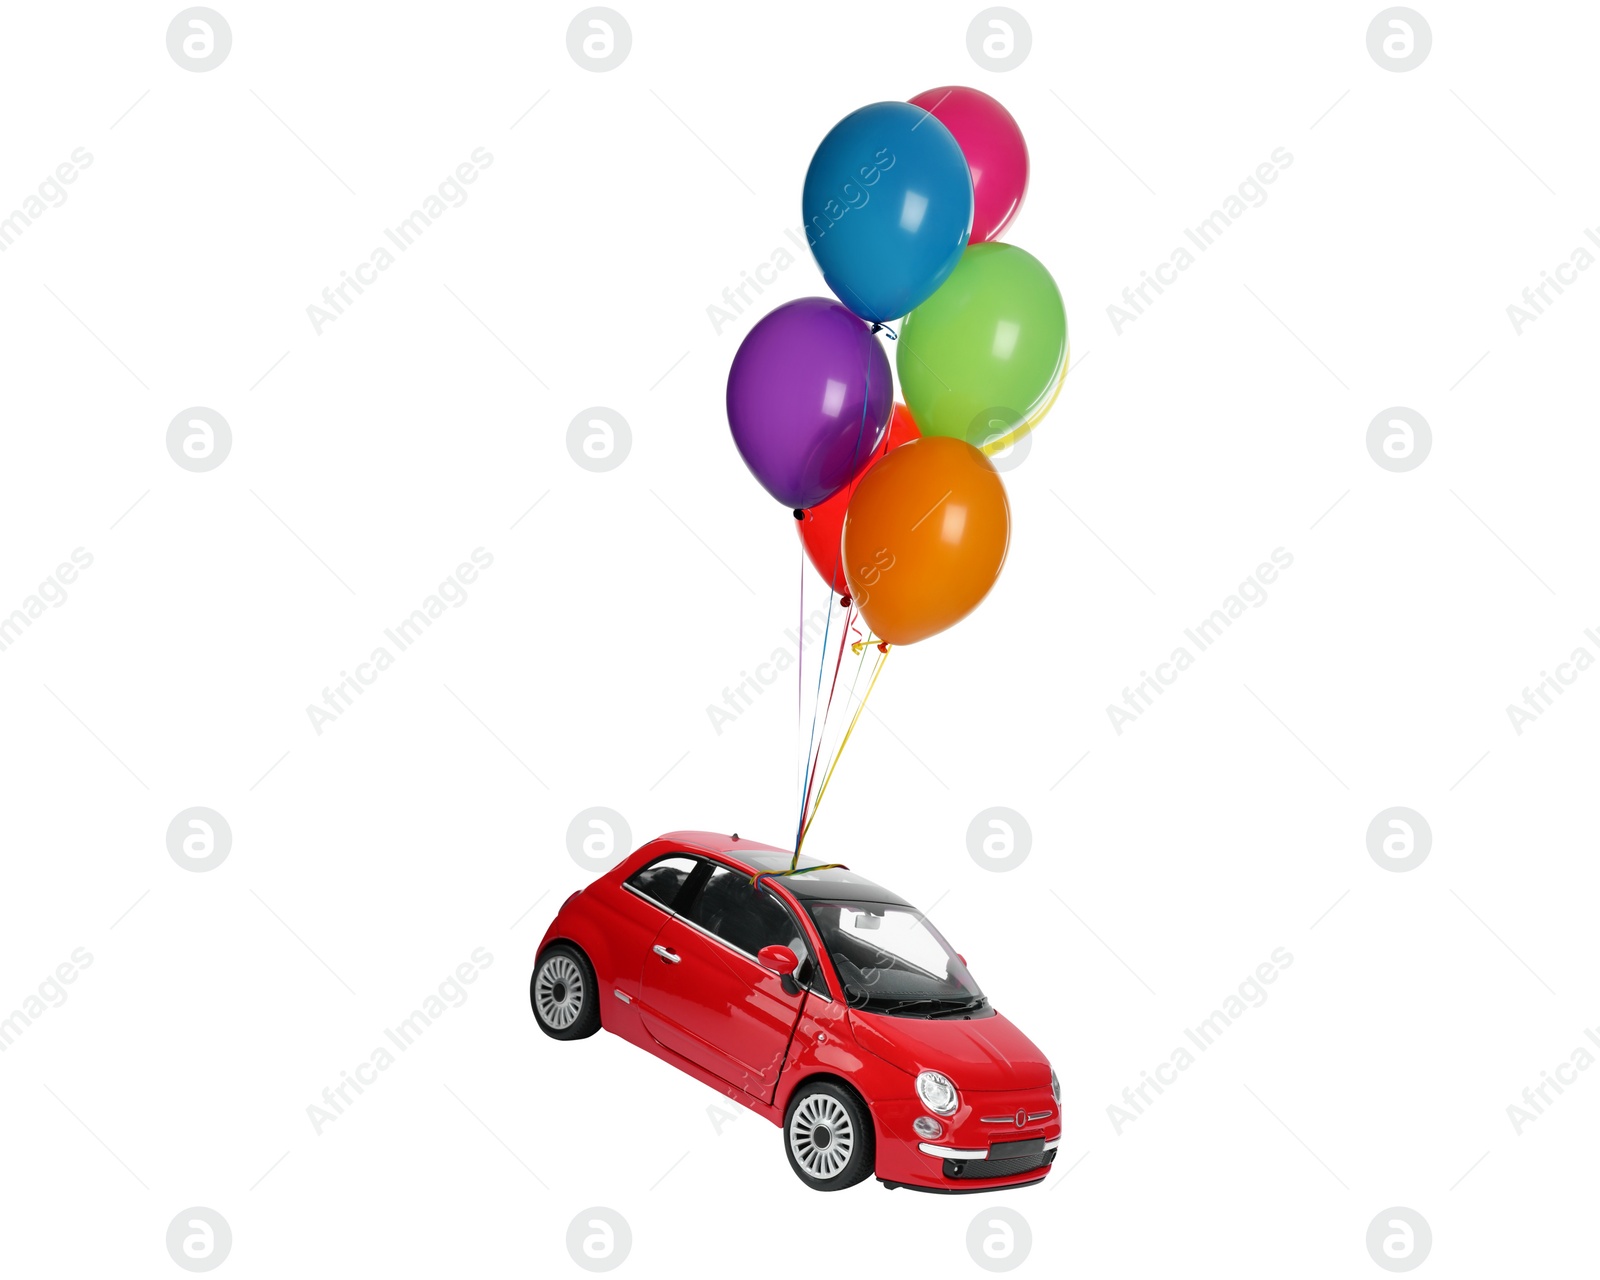 Image of Many balloons tied to toy car flying on white background